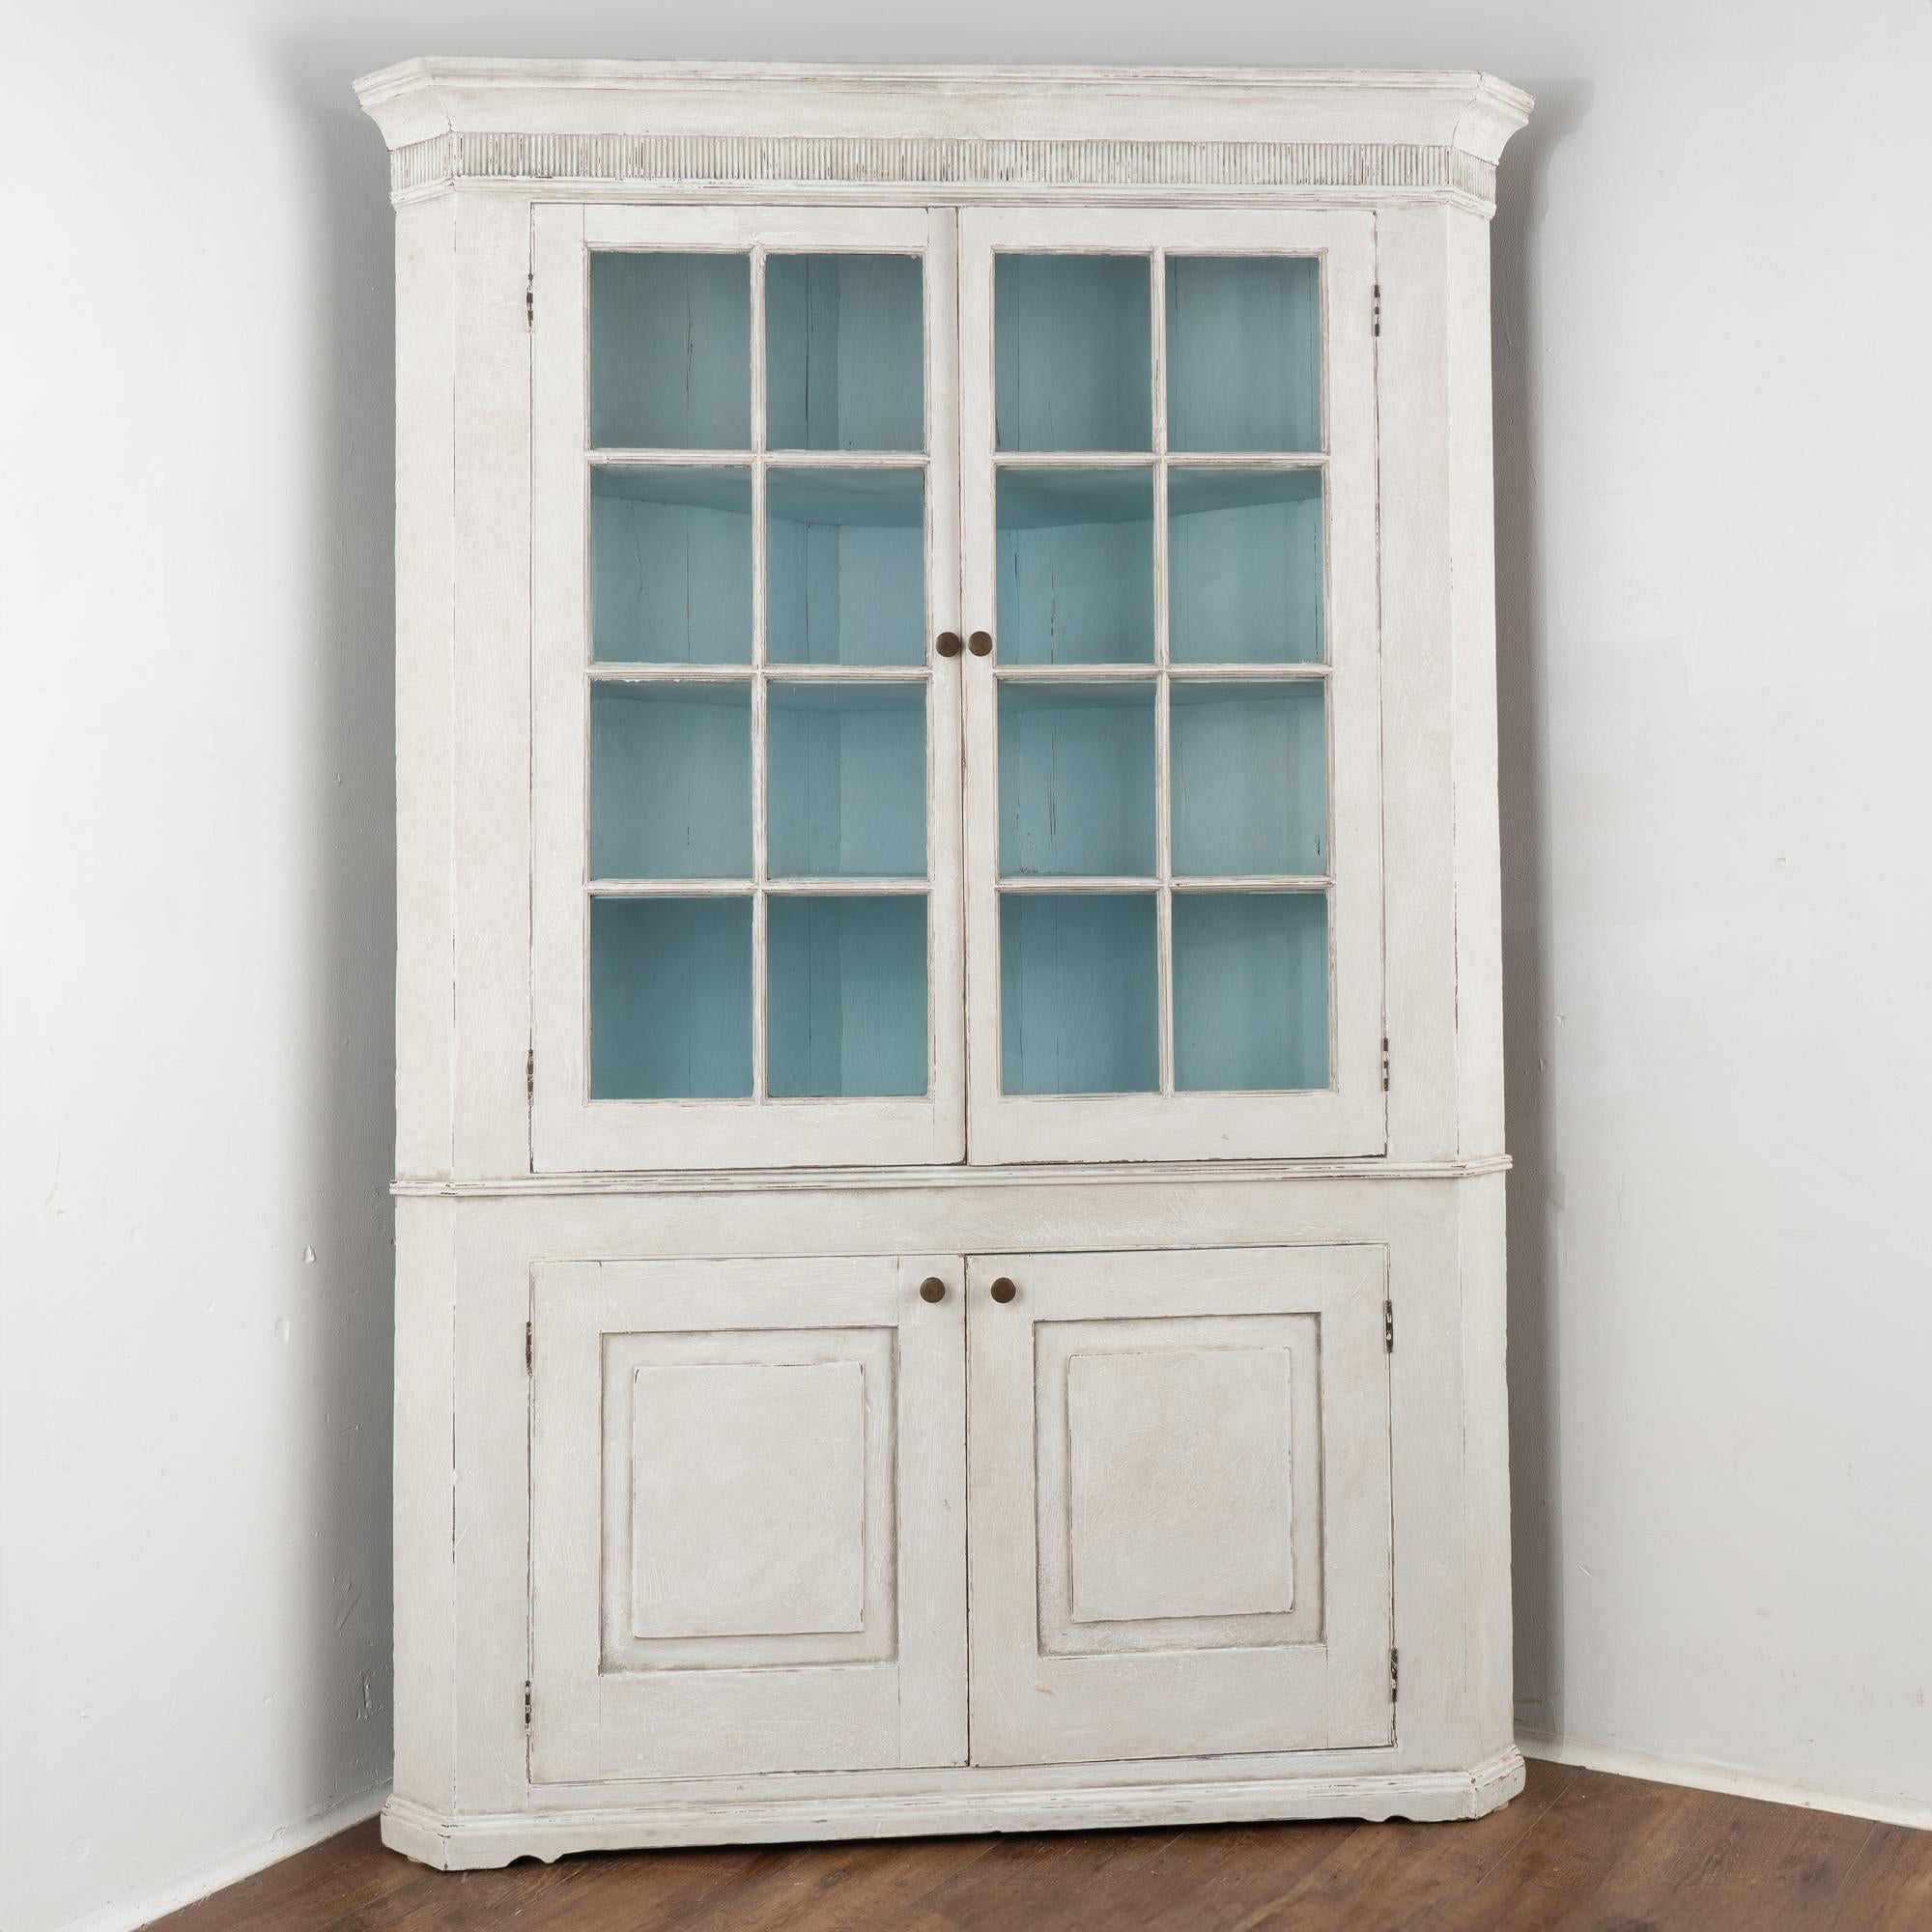 This pine corner cabinet has lovely pane glass upper doors allowing beautiful display of any collection held within. 
This large cabinet is built as one piece (it does not break down into sections) and reaches 7' tall with a simple crown and fluted